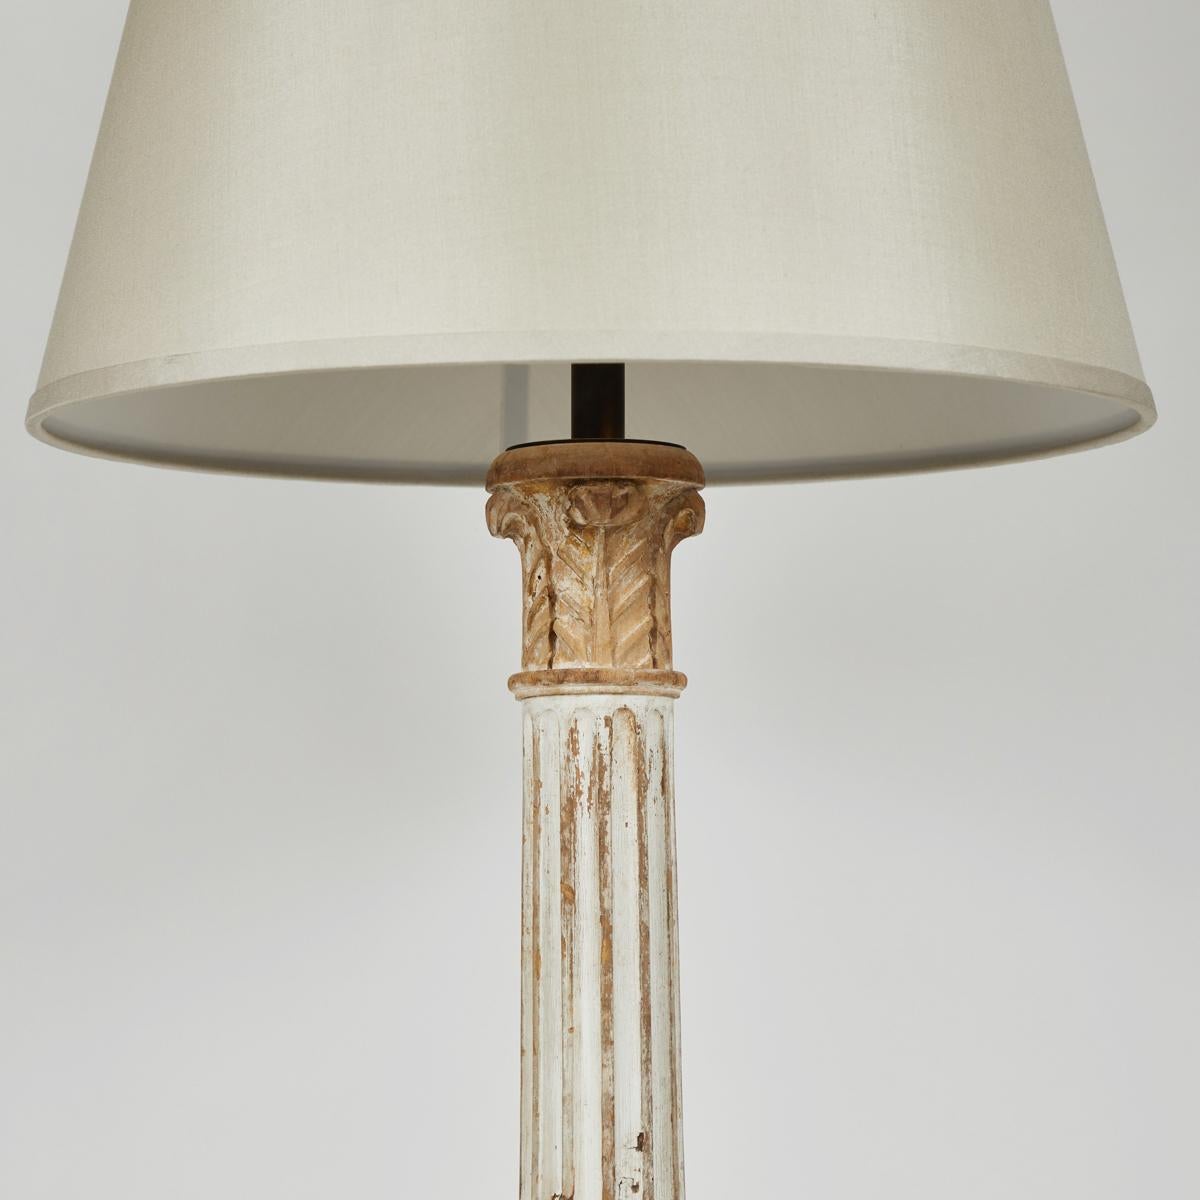 Painted Acanthus Leaf-Carved and Fluted Column Lamp from 19th Century, France In Good Condition For Sale In Los Angeles, CA